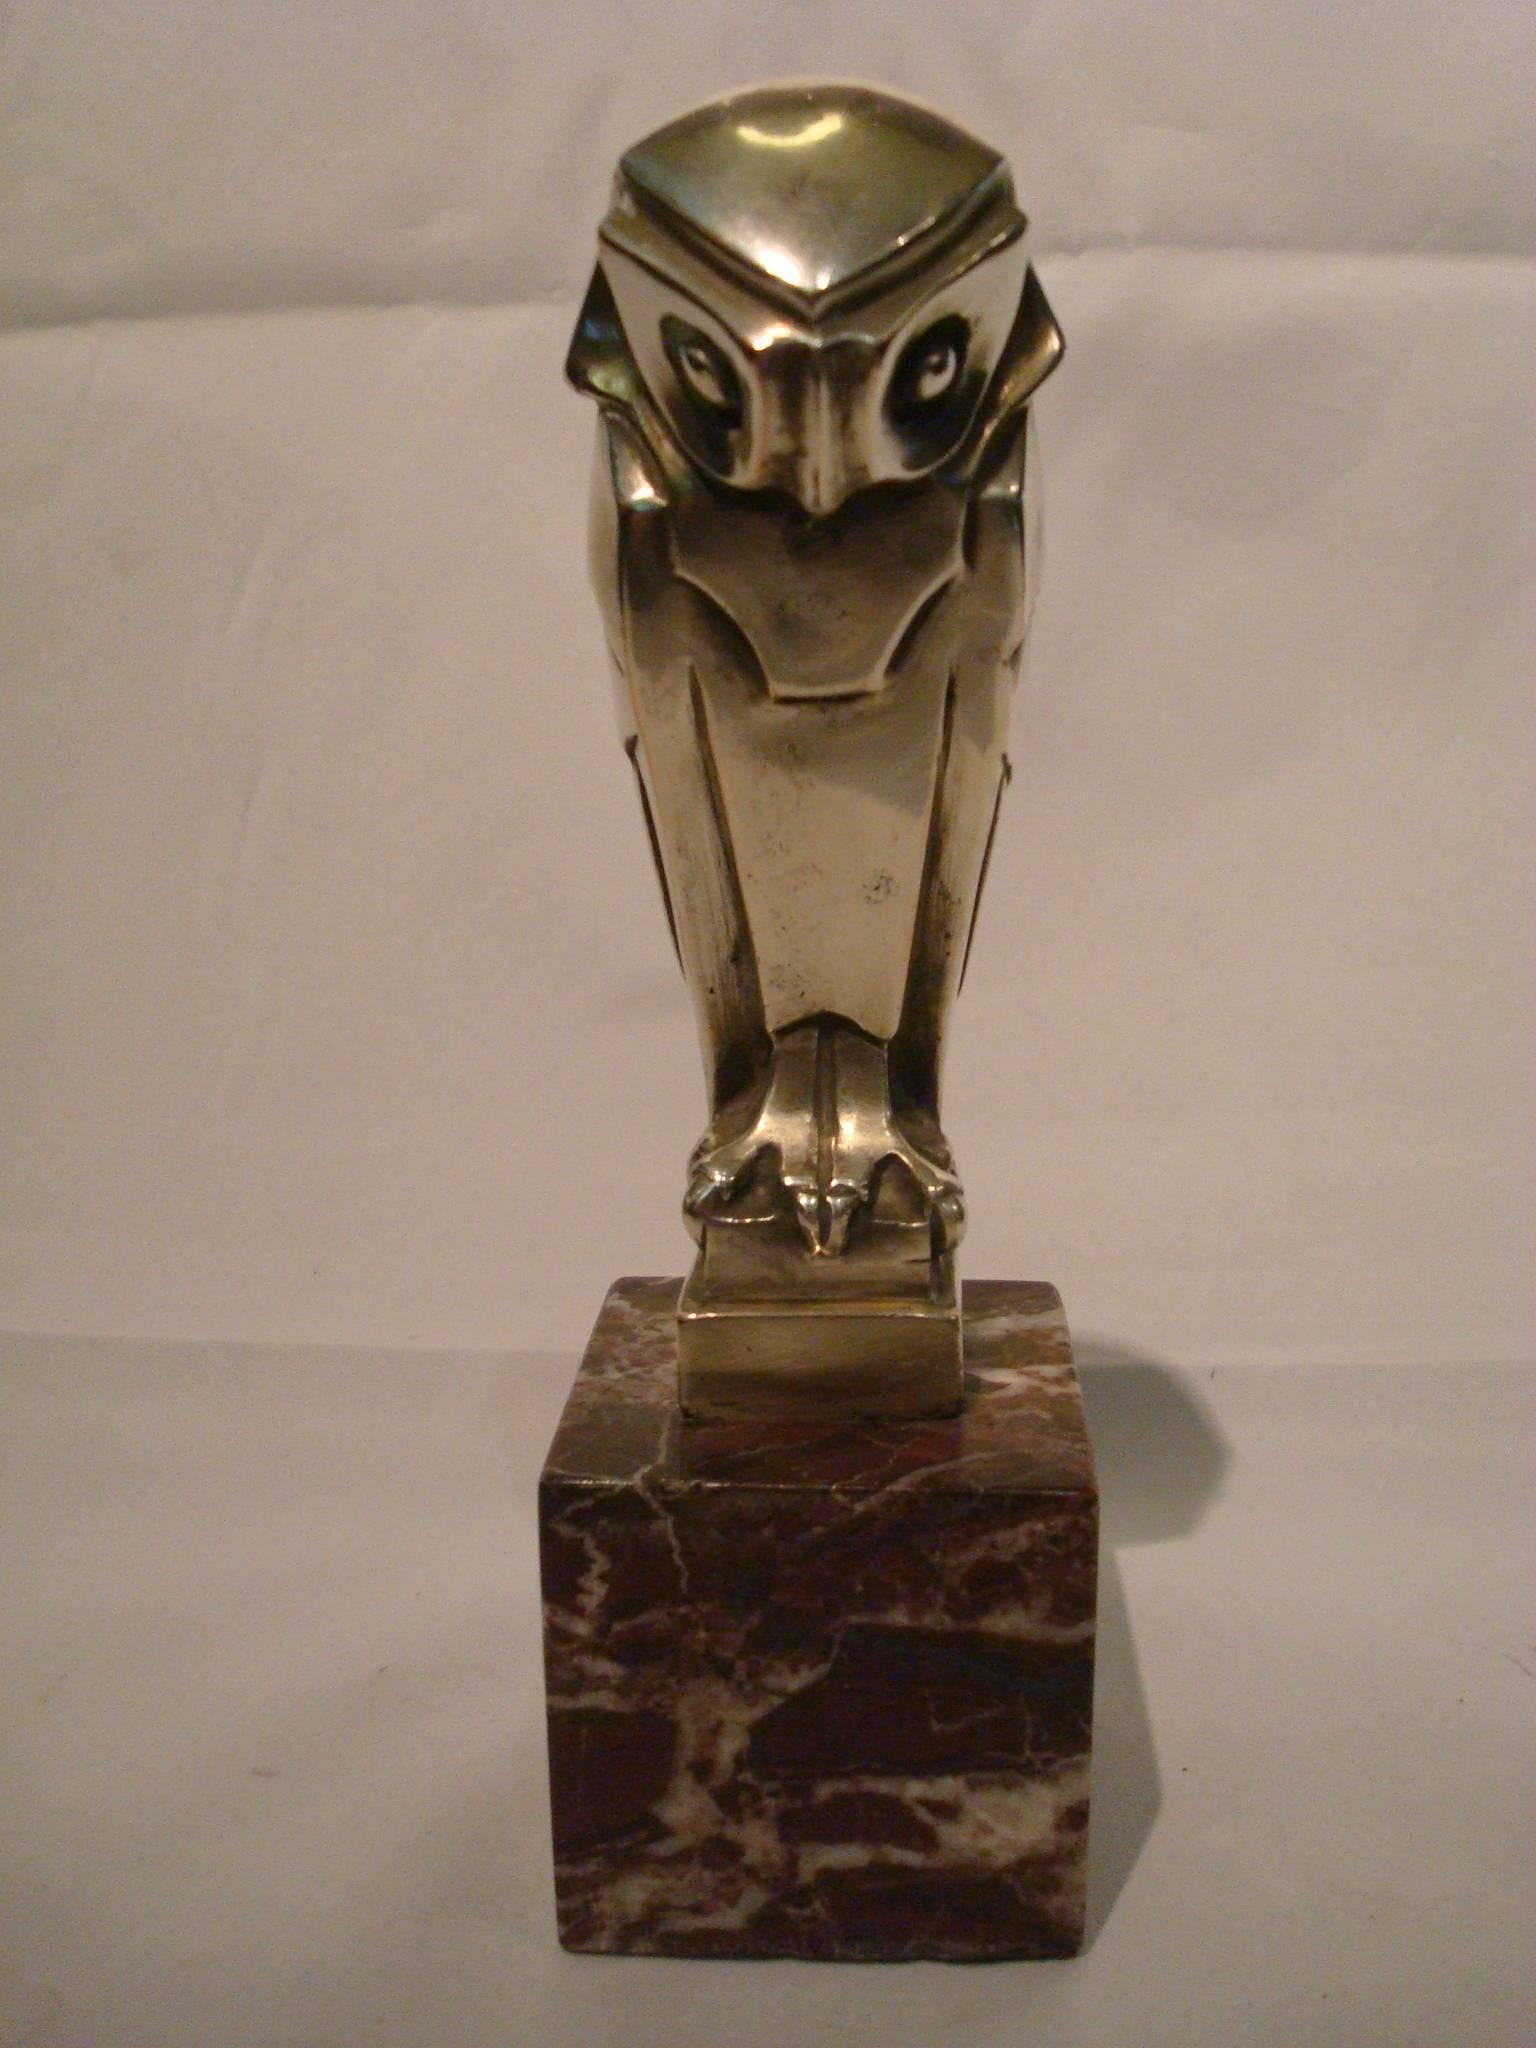 Edouard Marcel Sandoz (1881-1971) Owl - Hibou silver plated bronze car mascot, hood ornament. Also used as paperweight. Mounted over a marble base. Signed Sandoz and Susse Freres Foundry, Paris, circa 1920s. You can find more info: Fe´lix Marcilhac